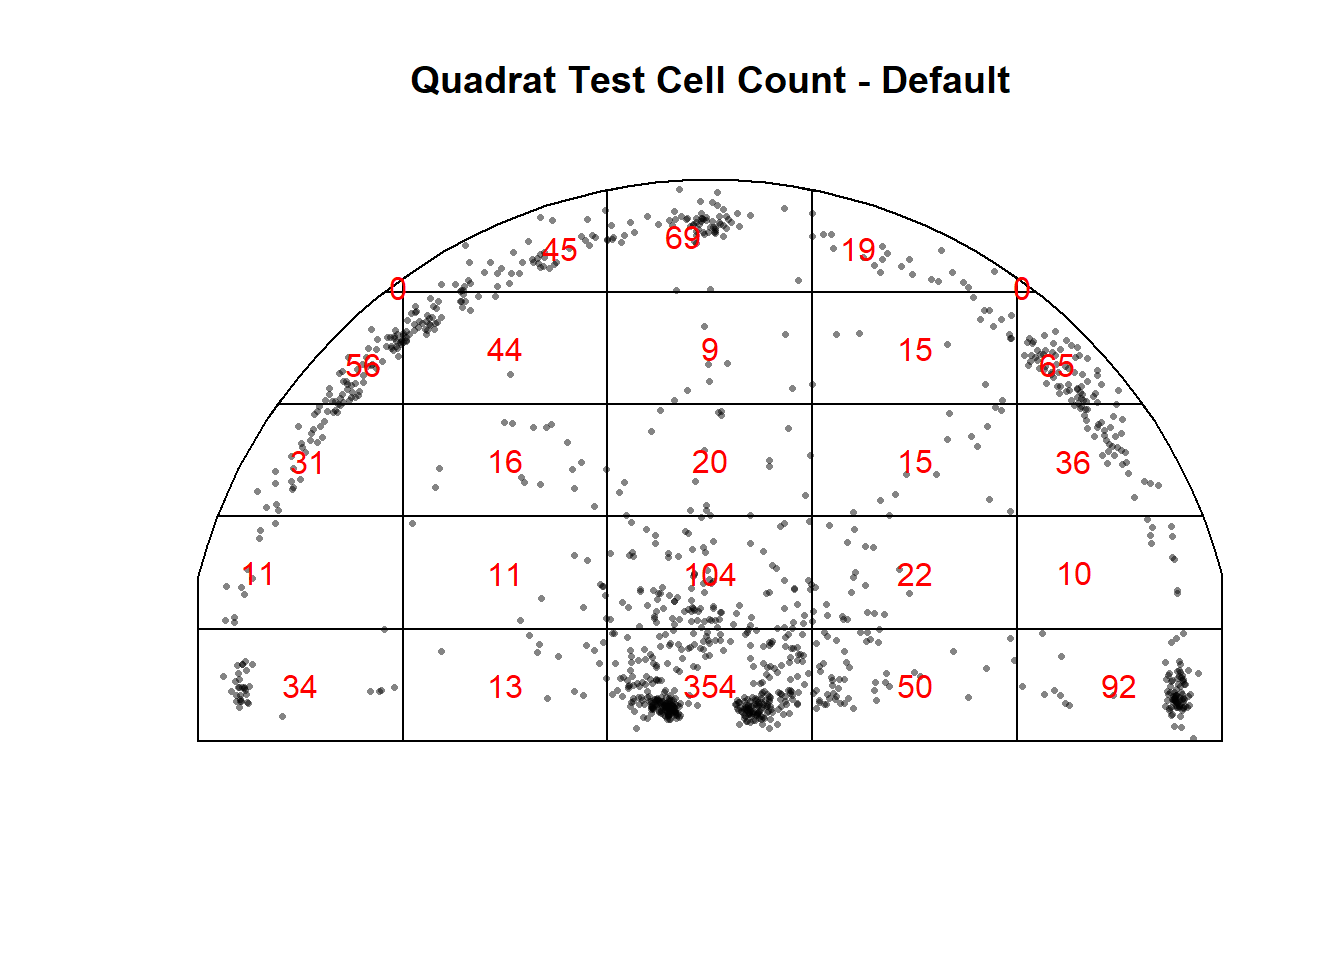 Are the cell counts random?